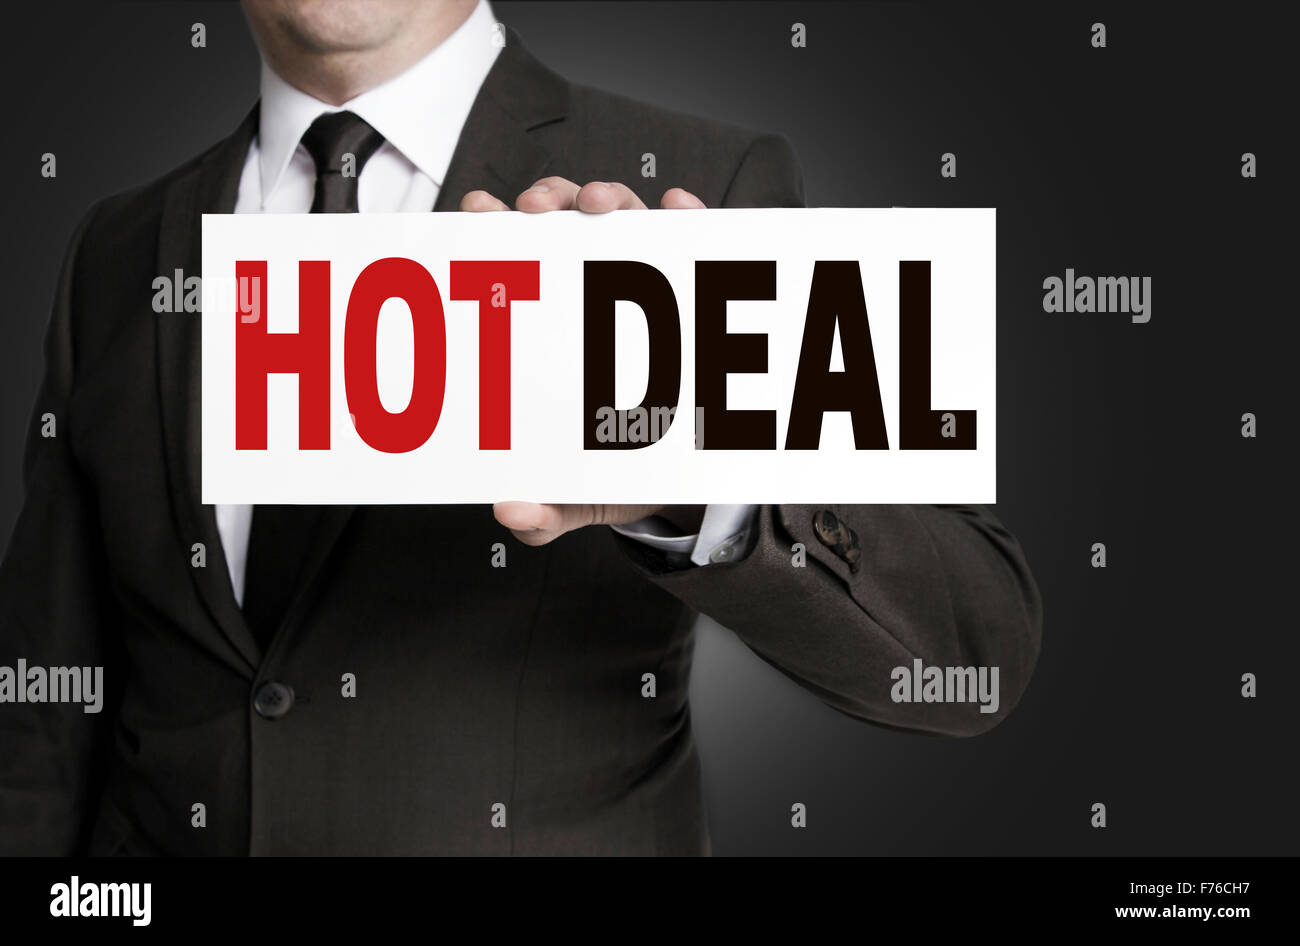 Hot Deal sign is held by businessman concept. Stock Photo